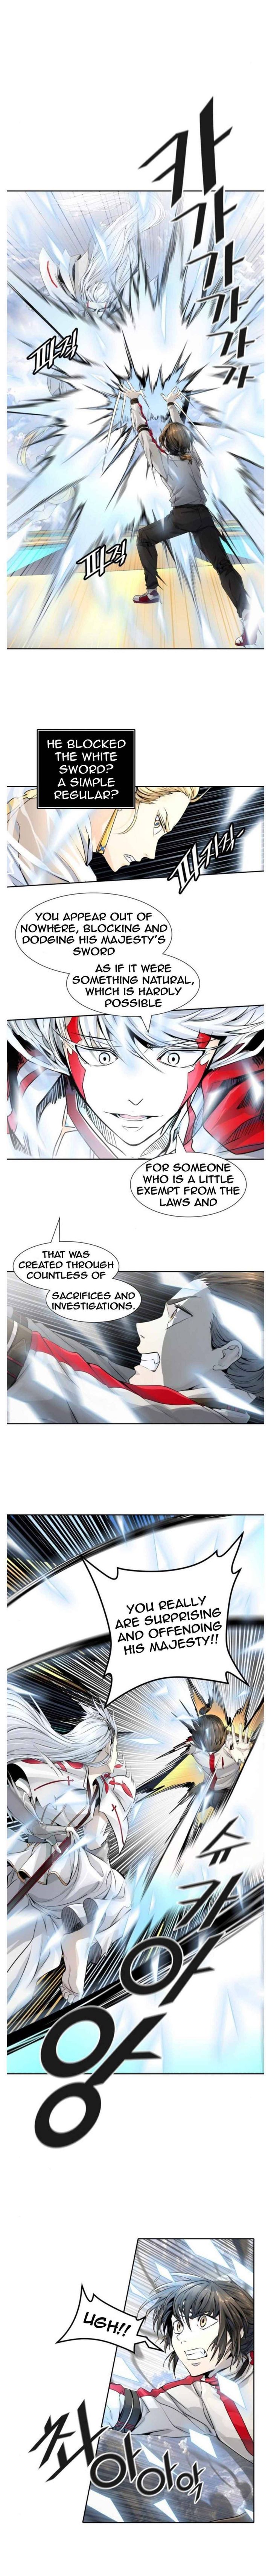 Tower Of God Chapter 496 Page 11